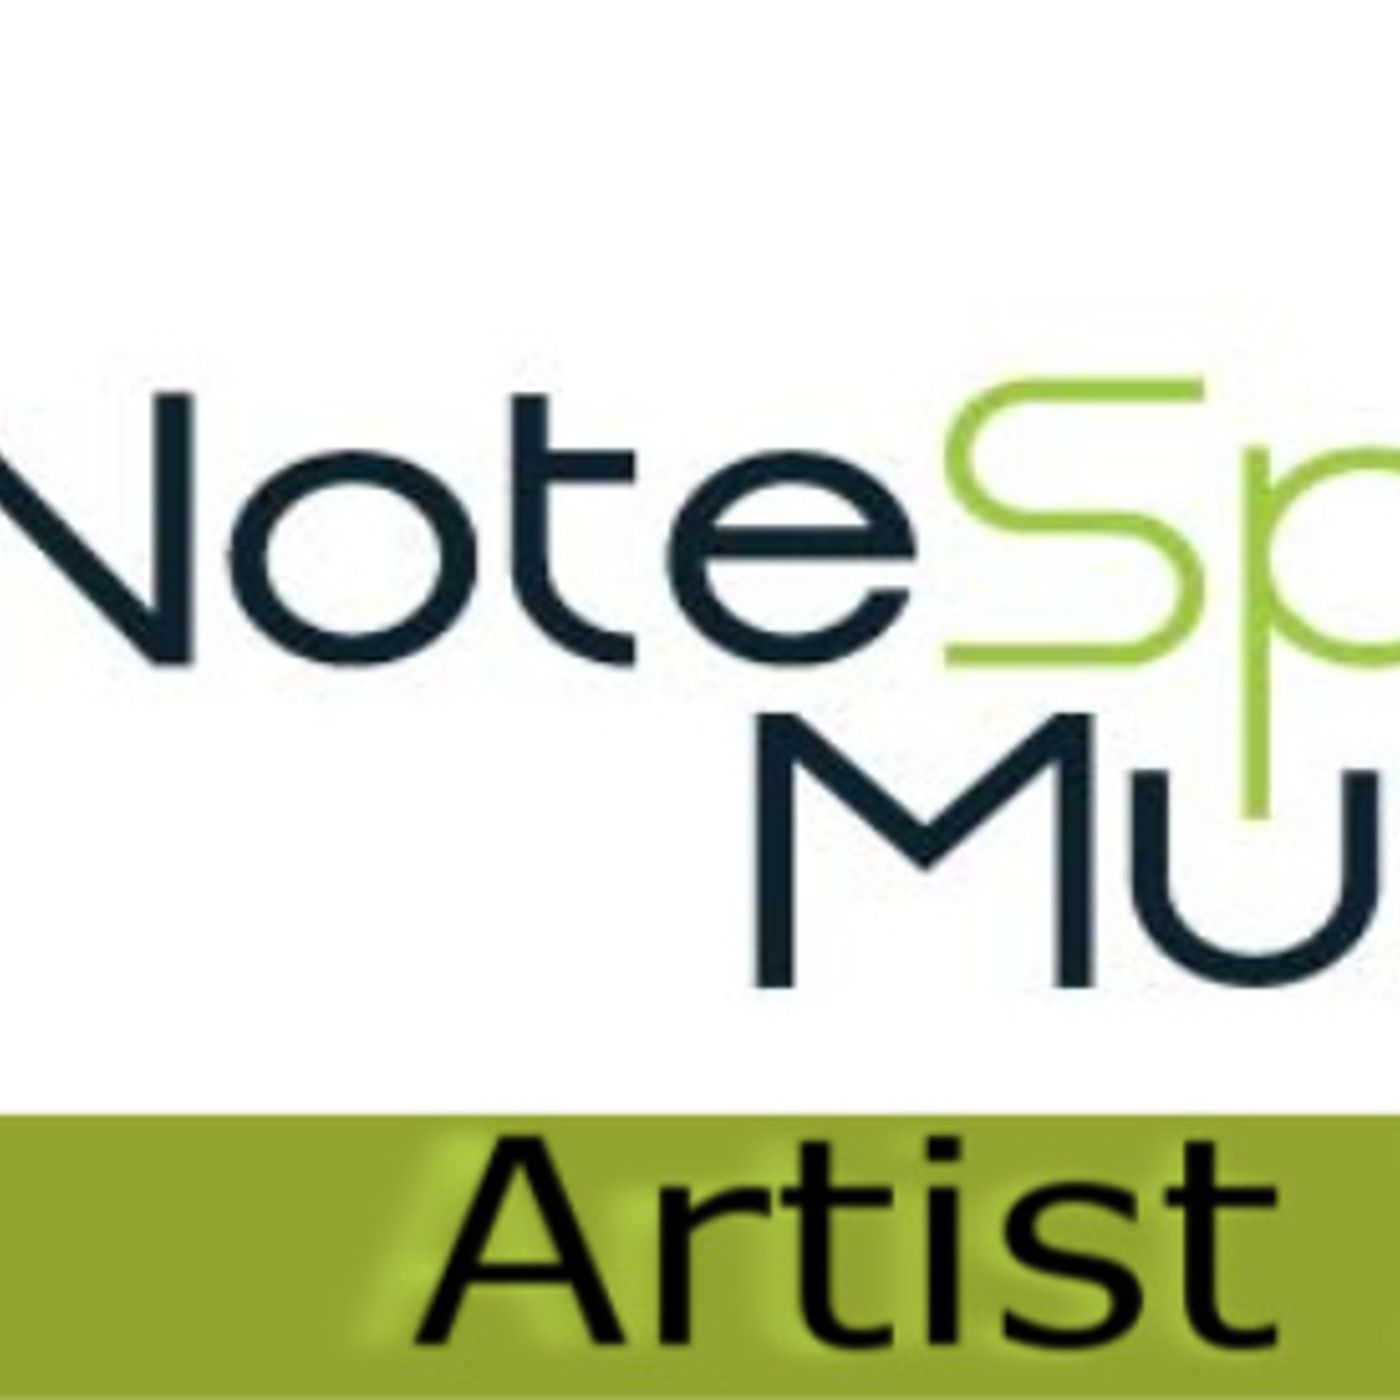 The NoteSpire Radio Artist Insight with Dave Wallace